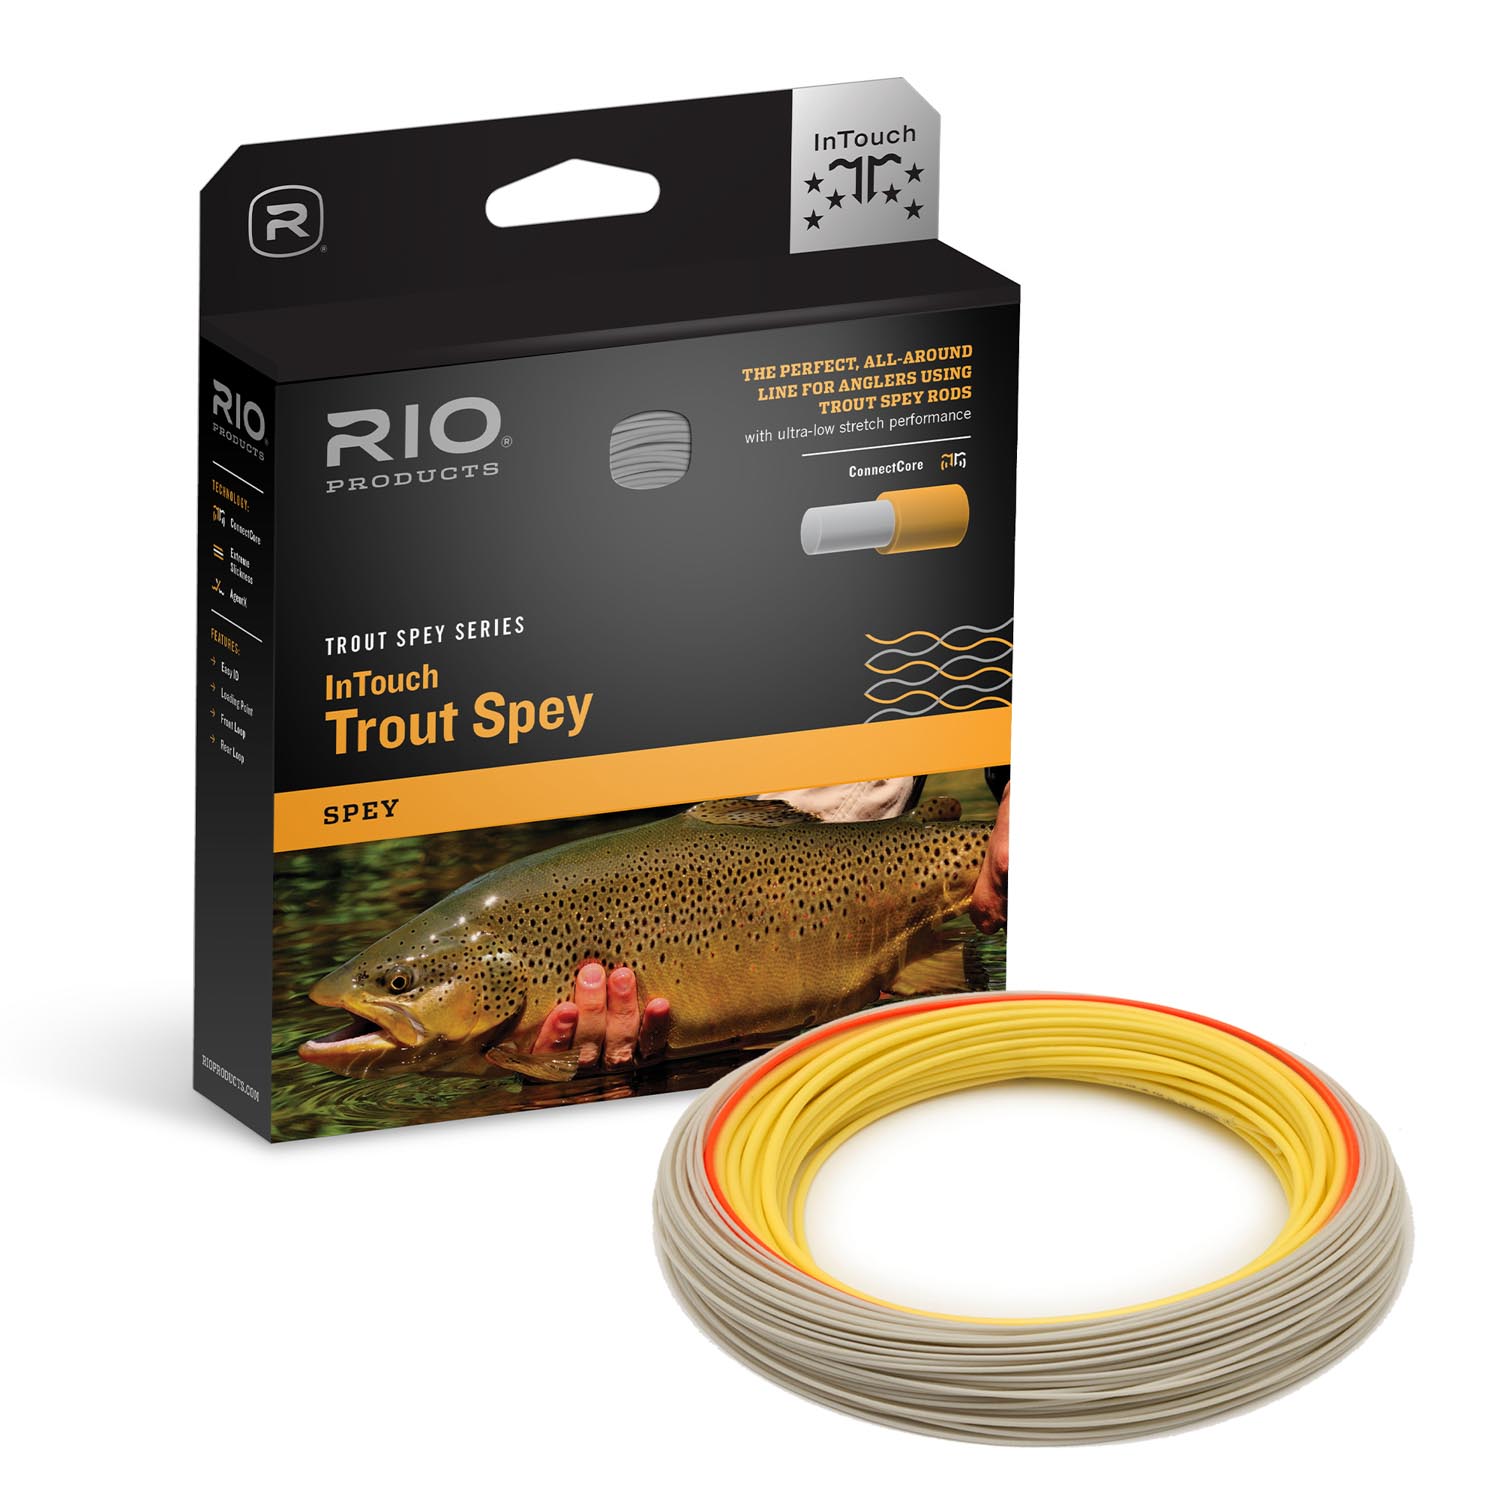 RIO Intouch Trout Spey Line – Guide Flyfishing